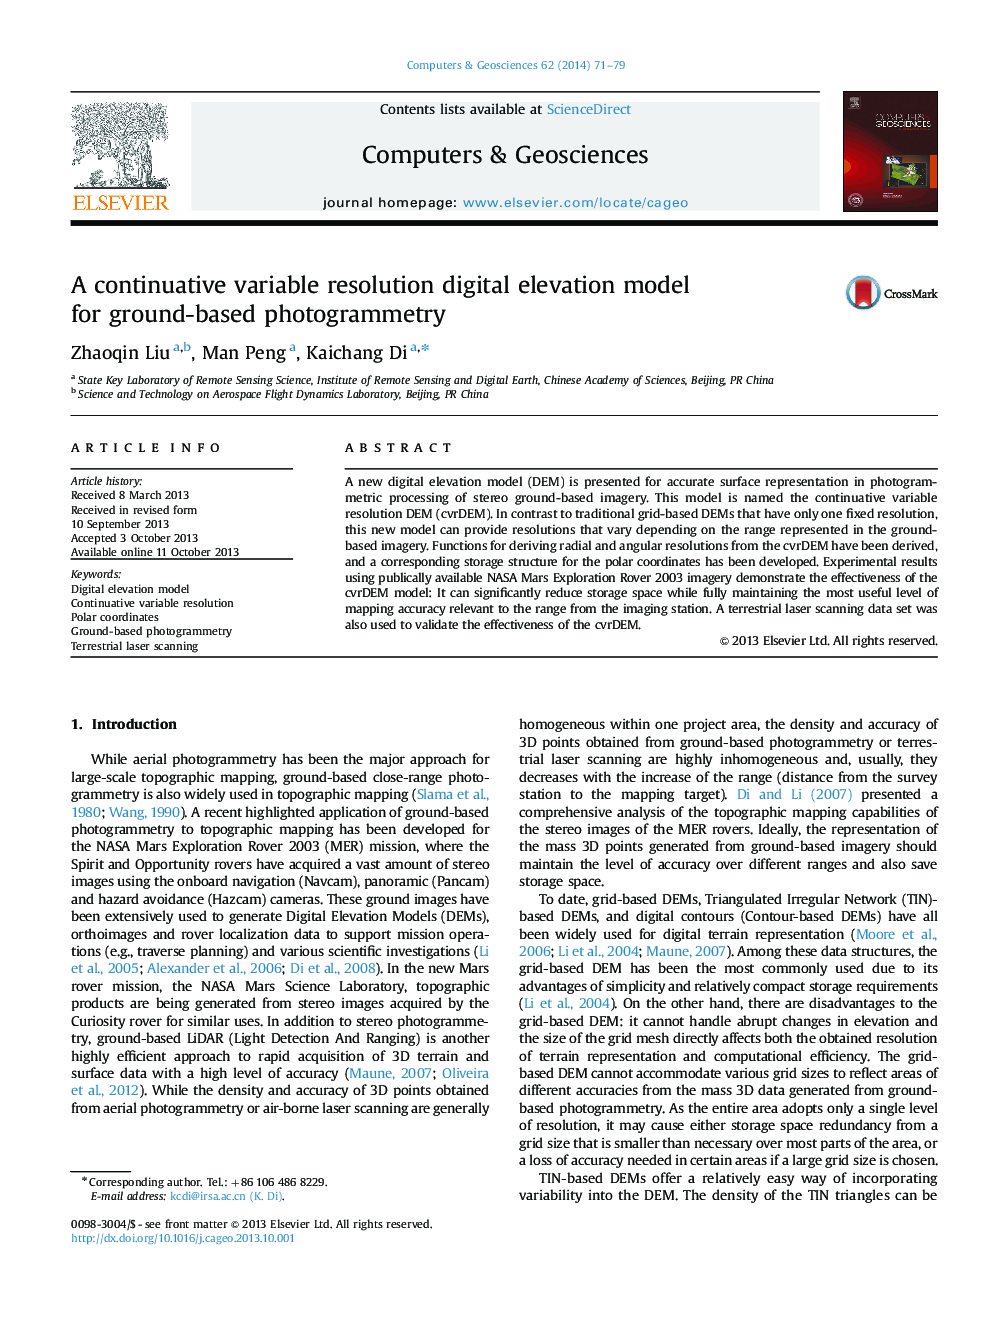 A continuative variable resolution digital elevation model for ground-based photogrammetry